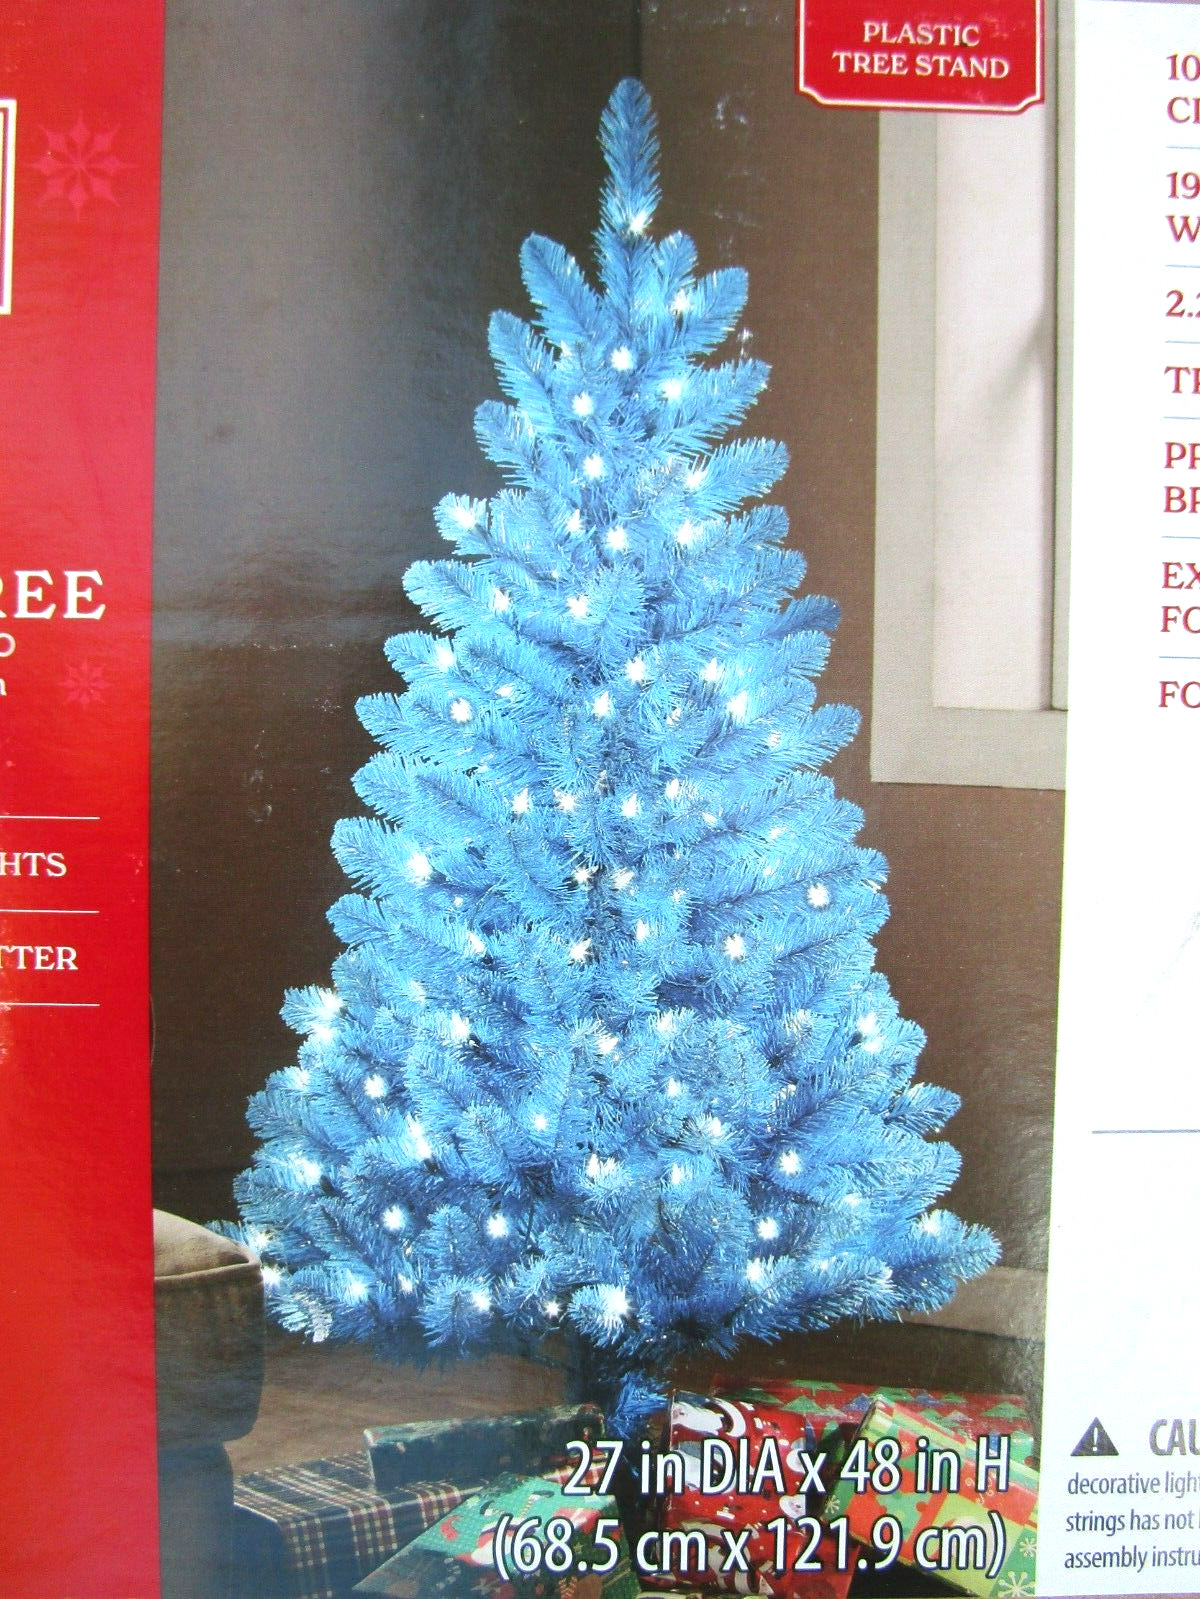 HOLIDAY TIME 4ft PRE-LIT TEAL BLUE CHRISTMAS TREE WITH 100 CLEAR LIGHTS - NEW